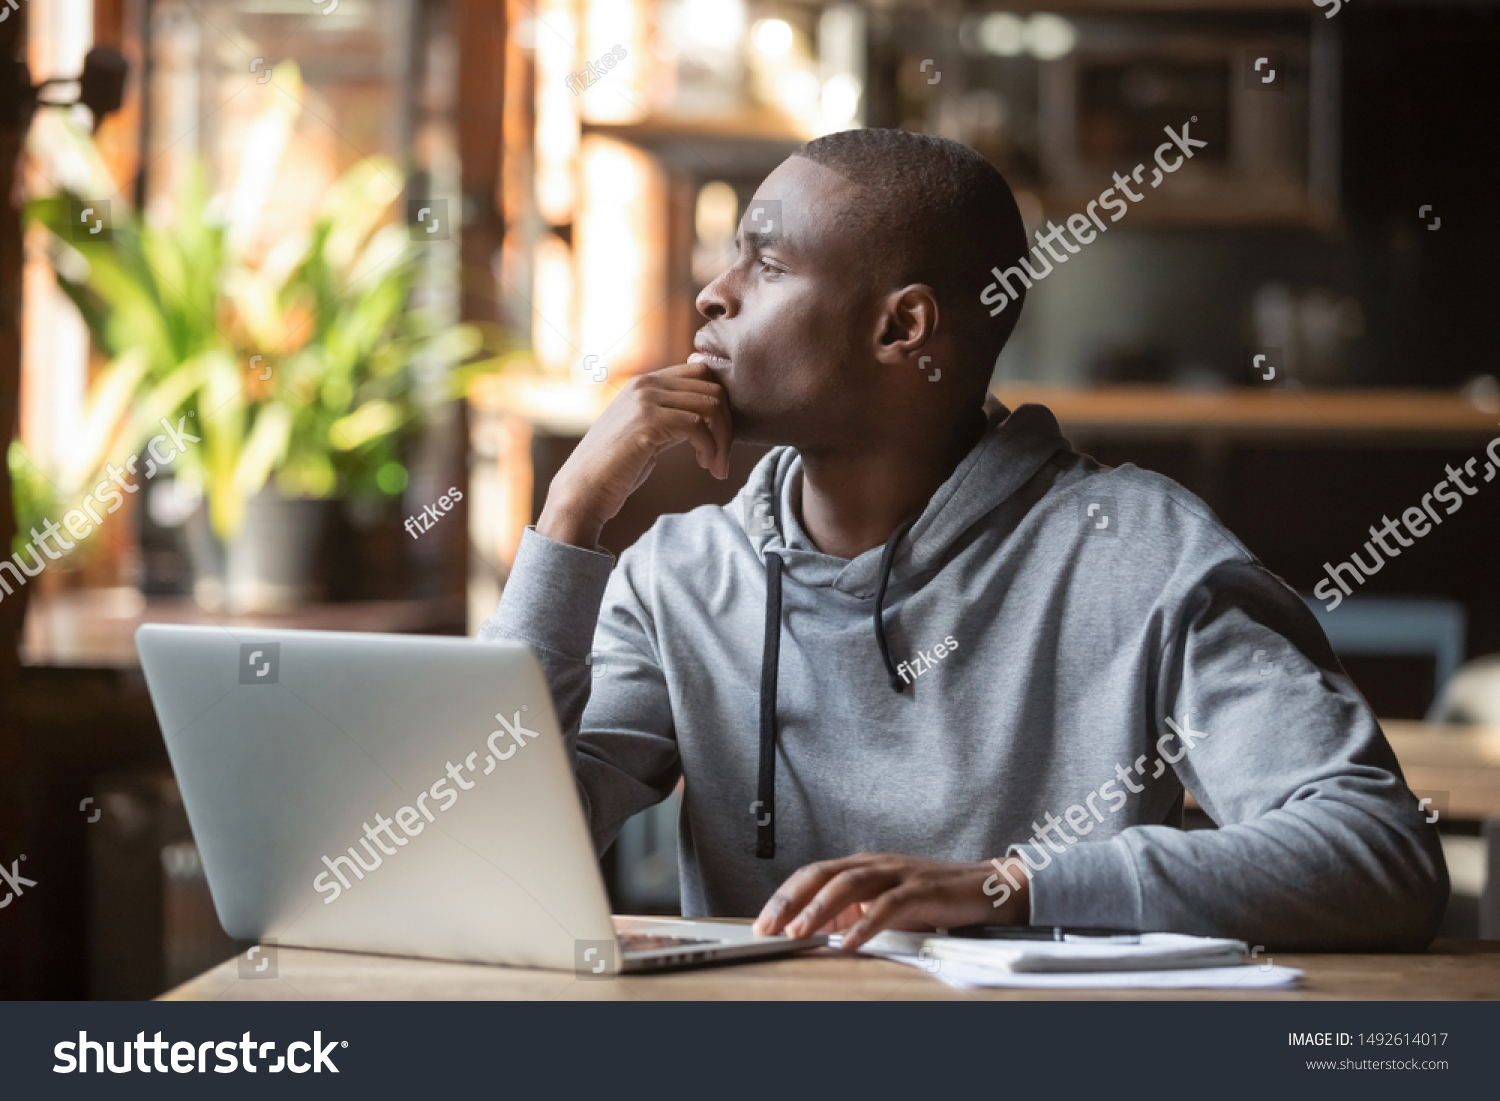 Thoughtful african american businessman lost in thoughts search for inspiration sit at cafe table using laptop, dreamy pensive contemplative black student looking away thinking of new creative ideas #1492614017